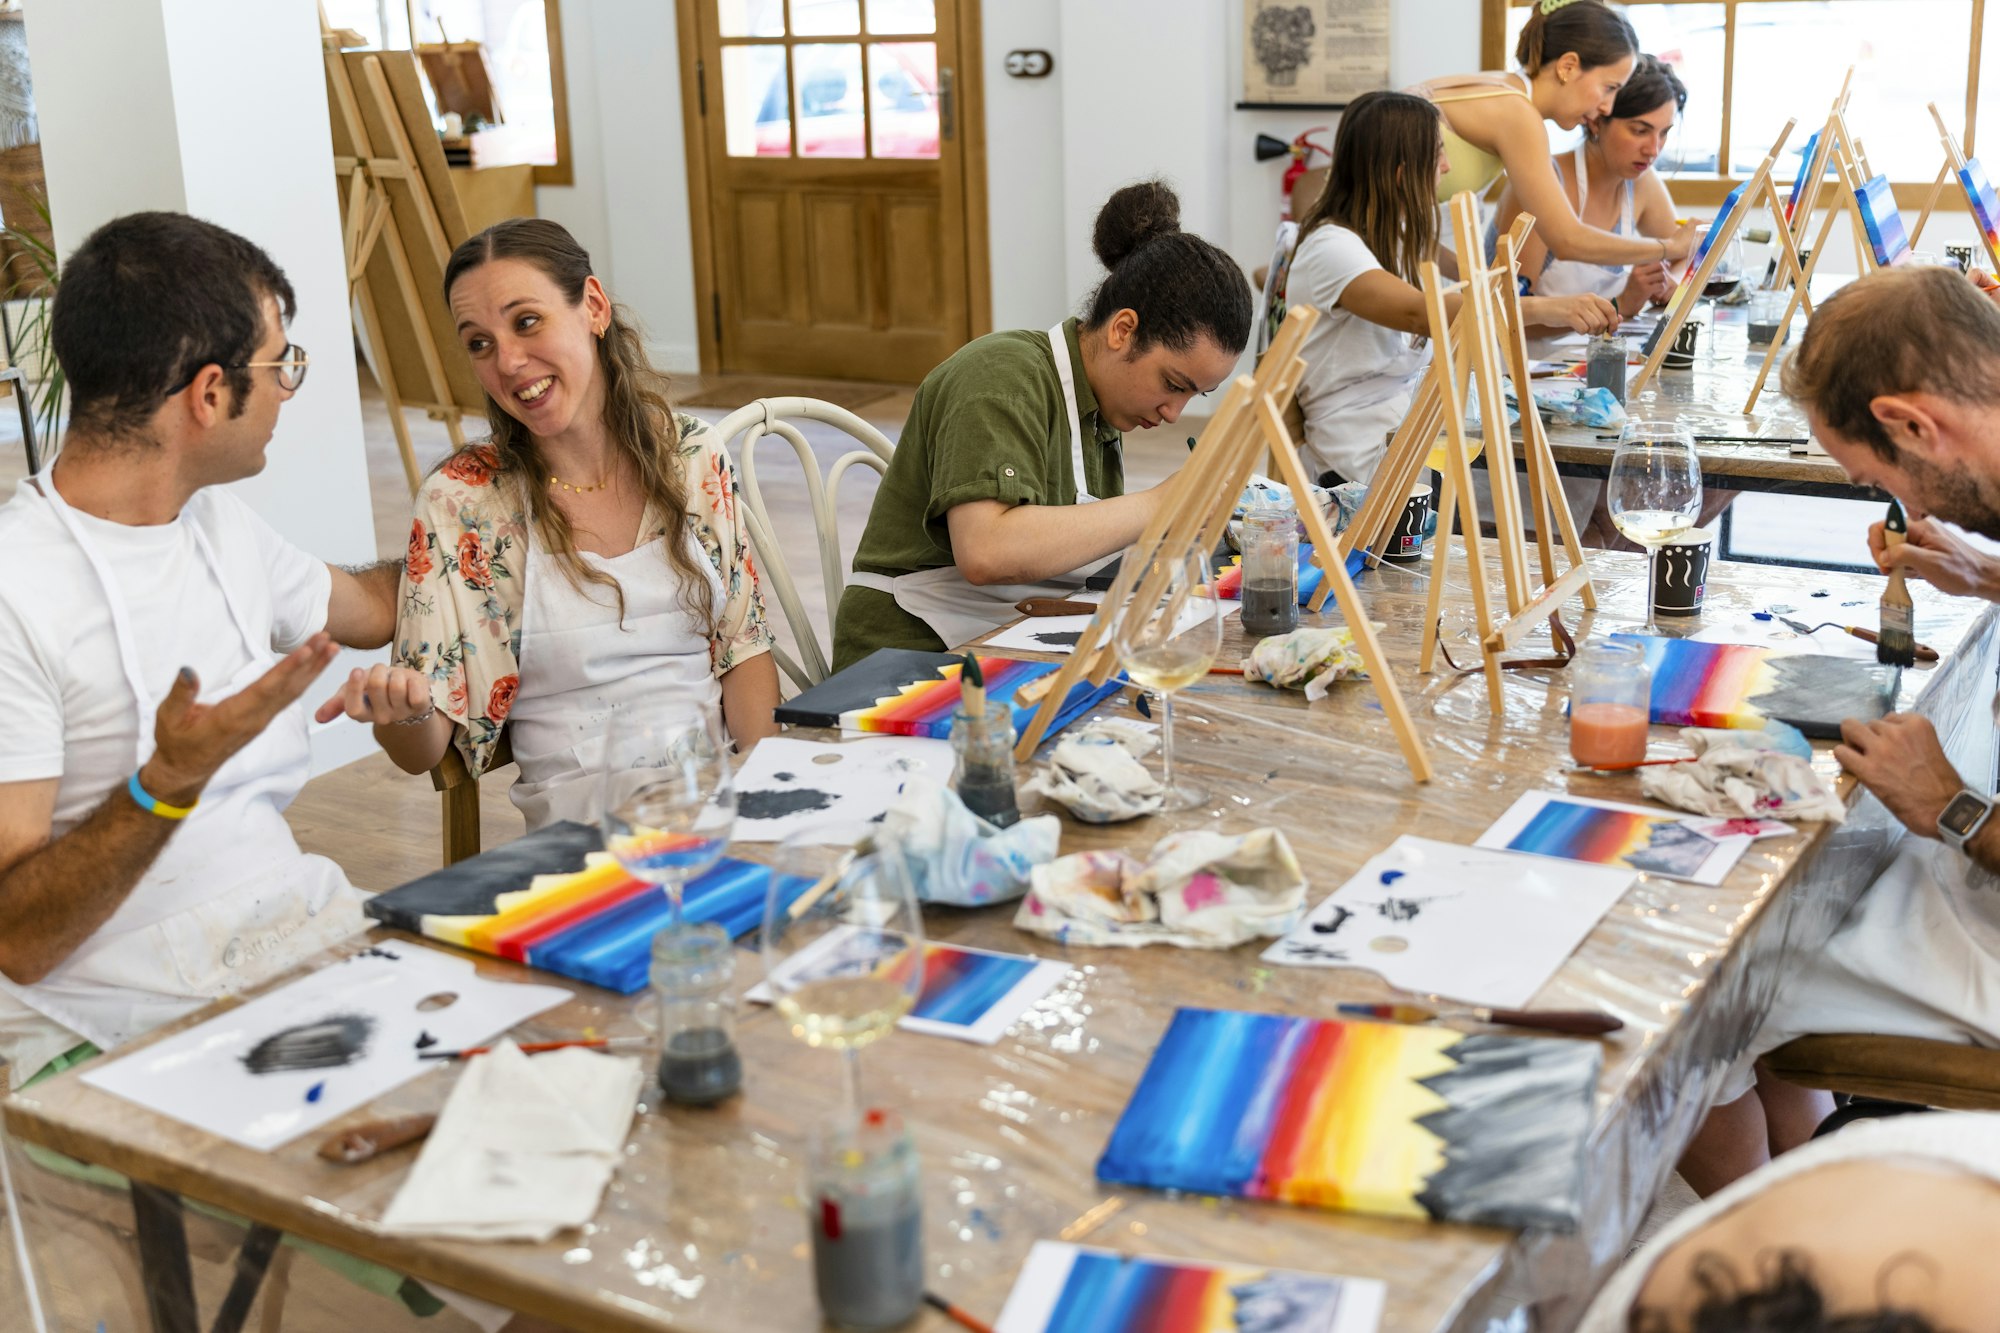 Painting Workshop. Friends having fun in painting class.